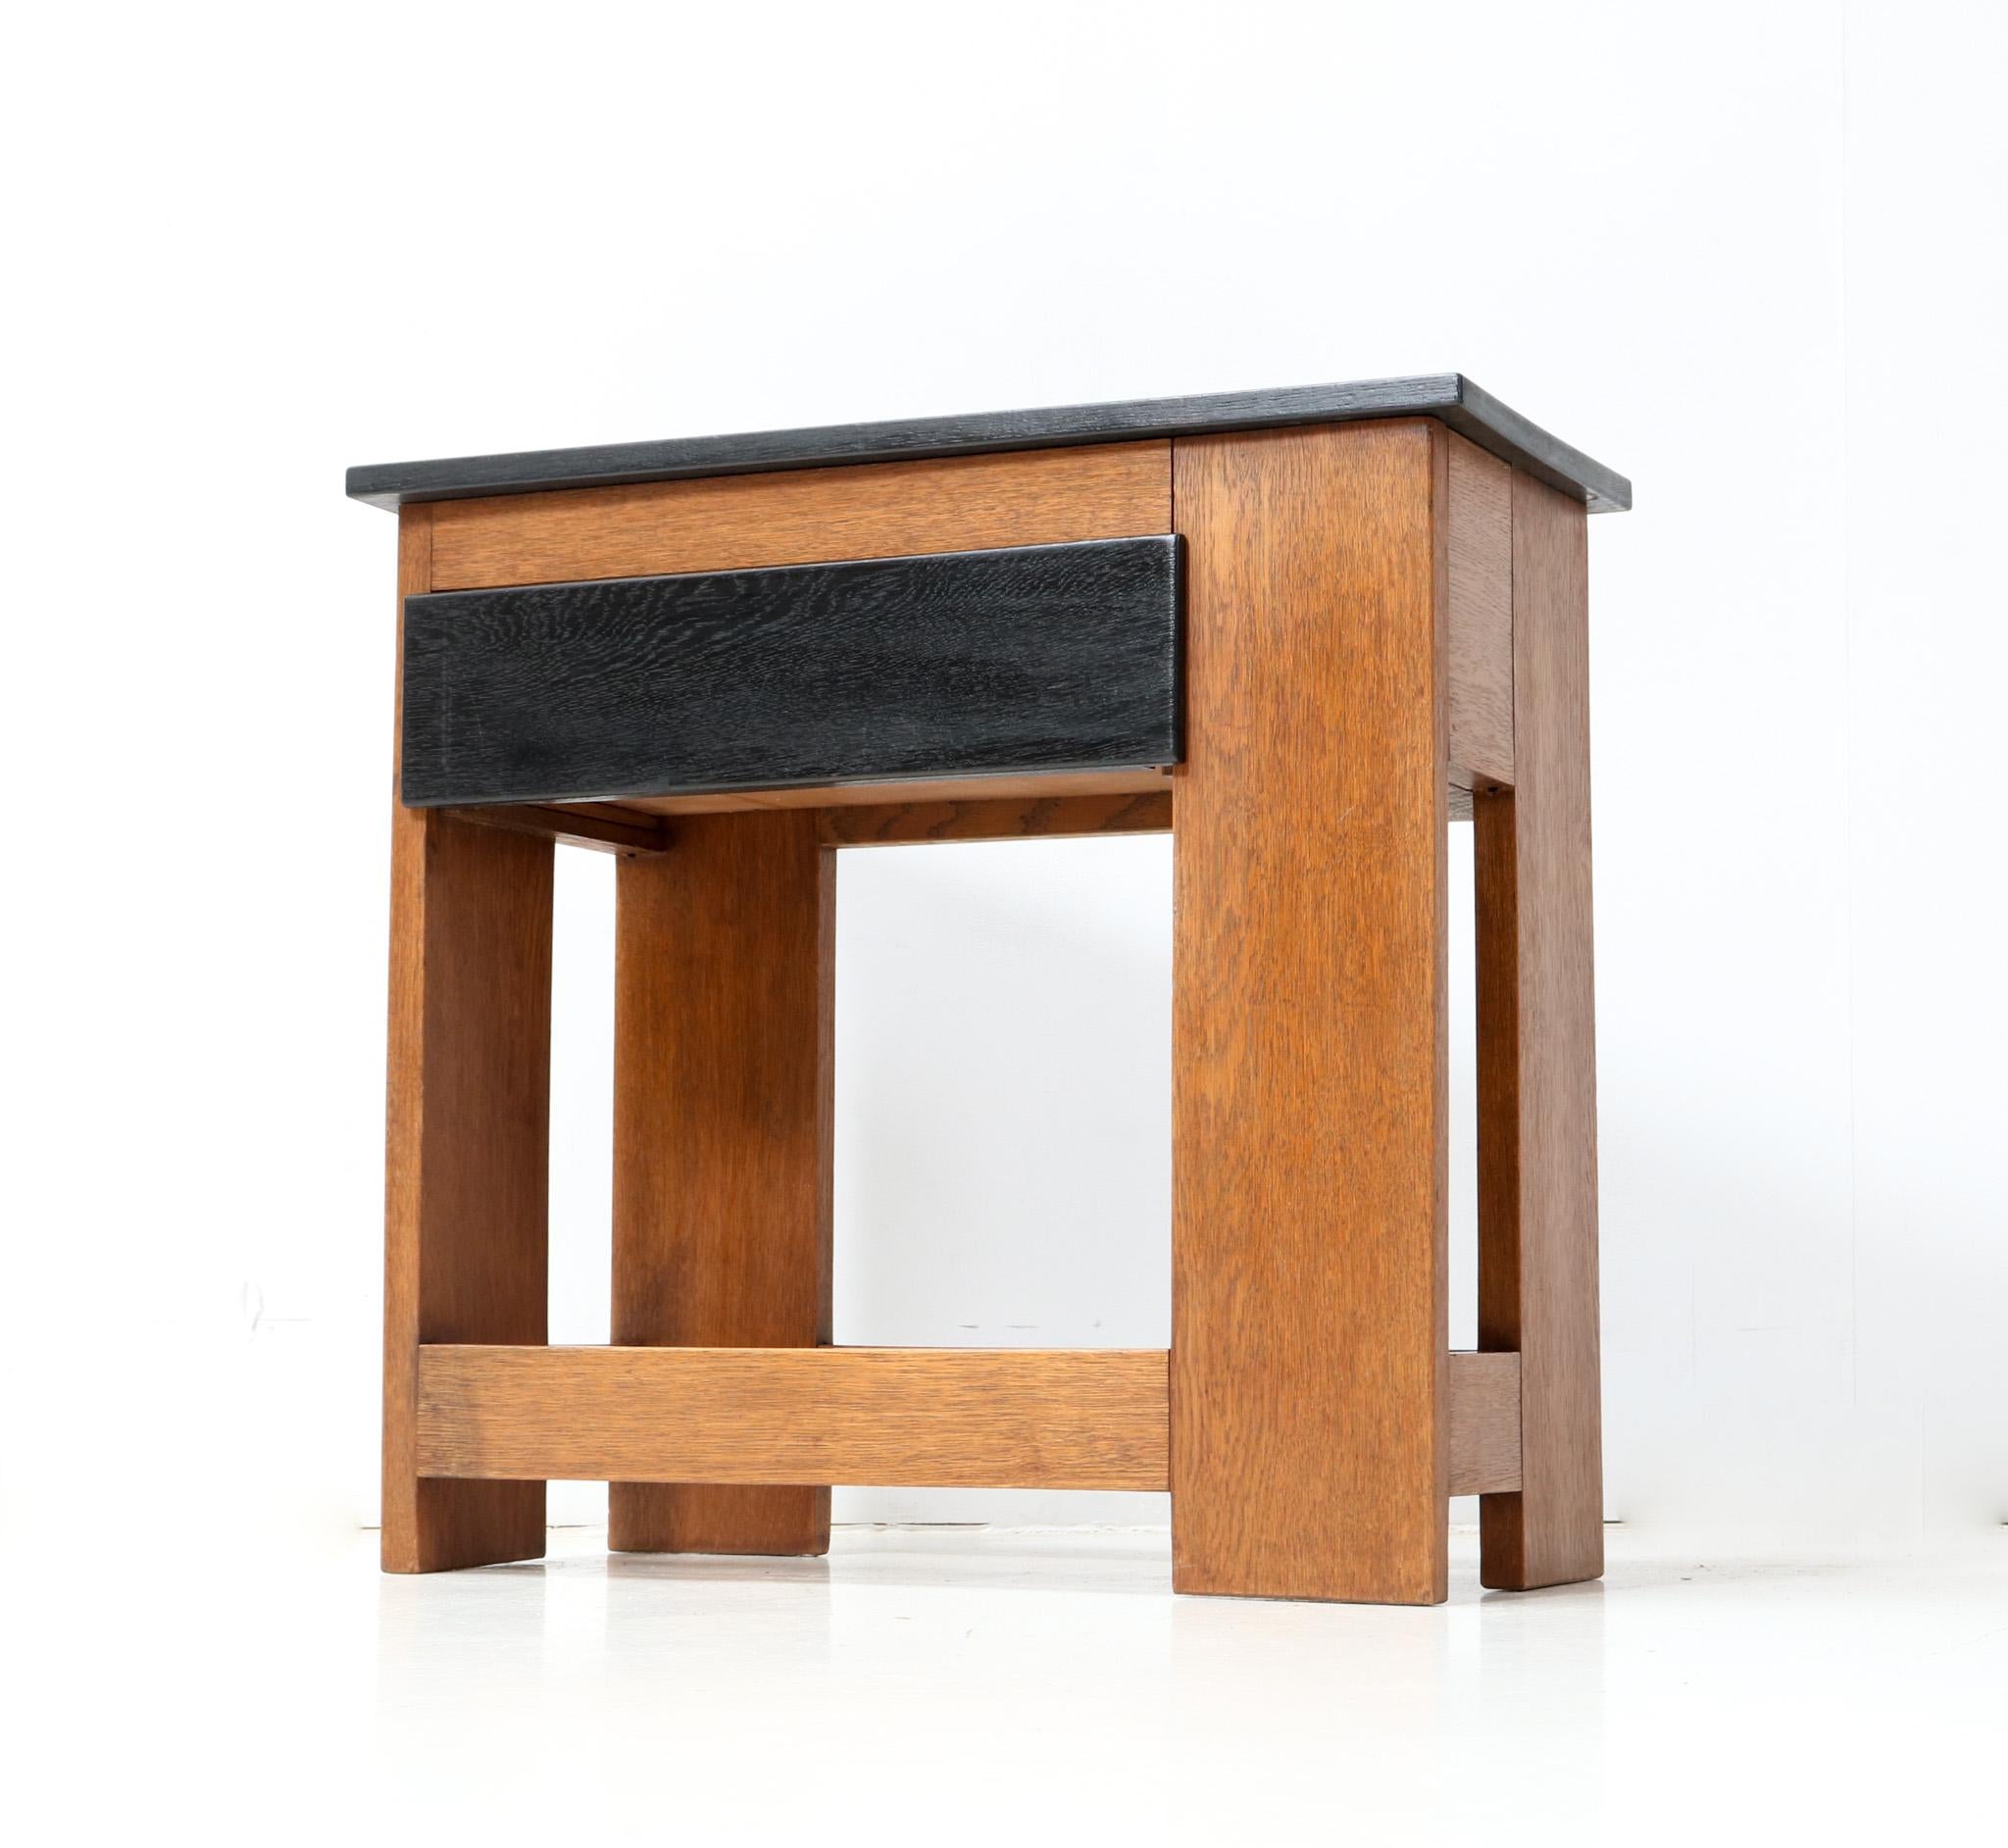  Art Deco Modernist Oak Cabinet or Side Table by Cor Alons, 1920s For Sale 1